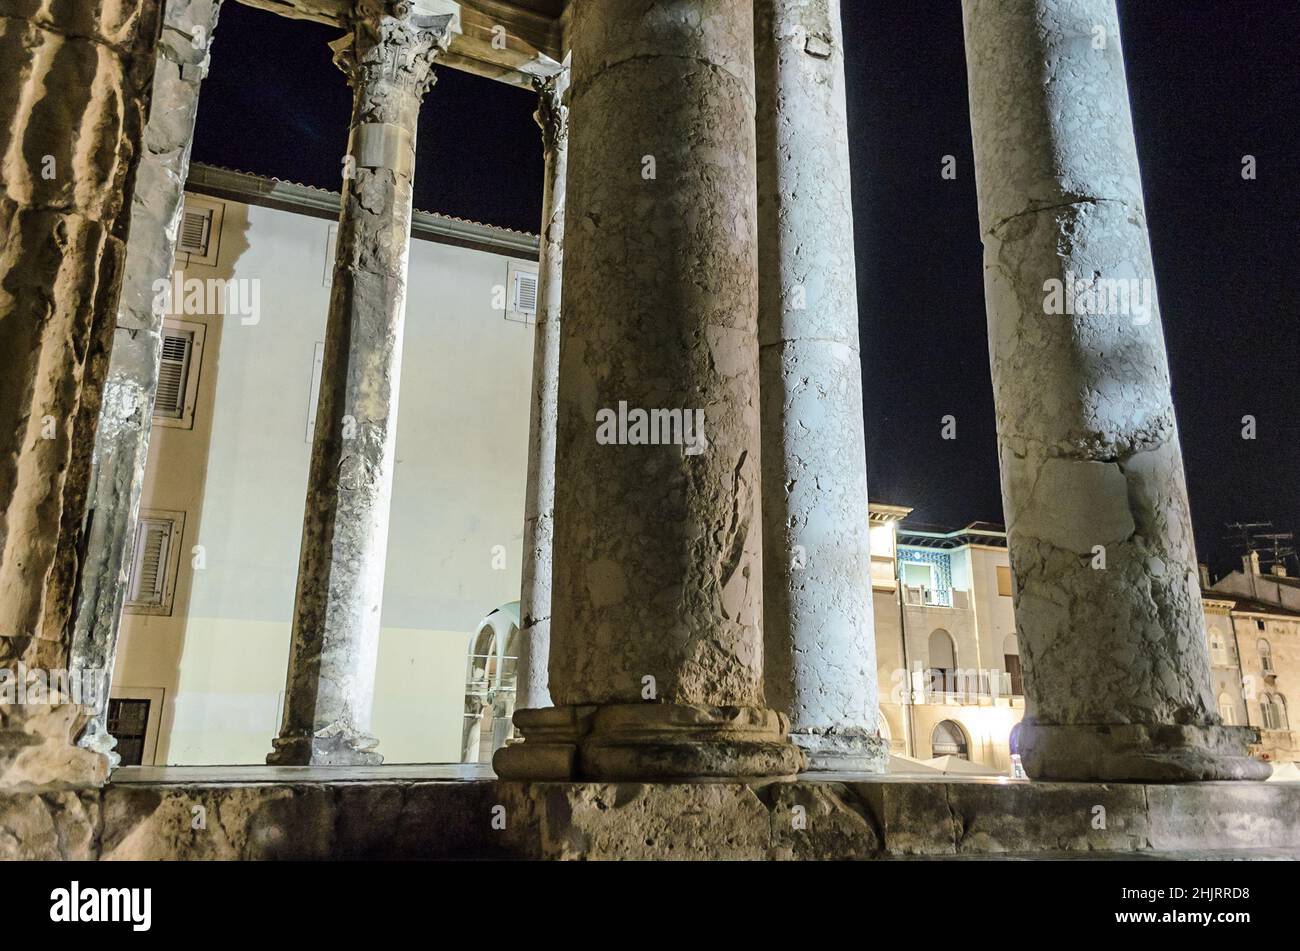 The Ancient Roman Temple of Augustus at Night. A Well Preserved Monument. Unique Architectural Greek Classical Style. Close up View of the Columns Stock Photo